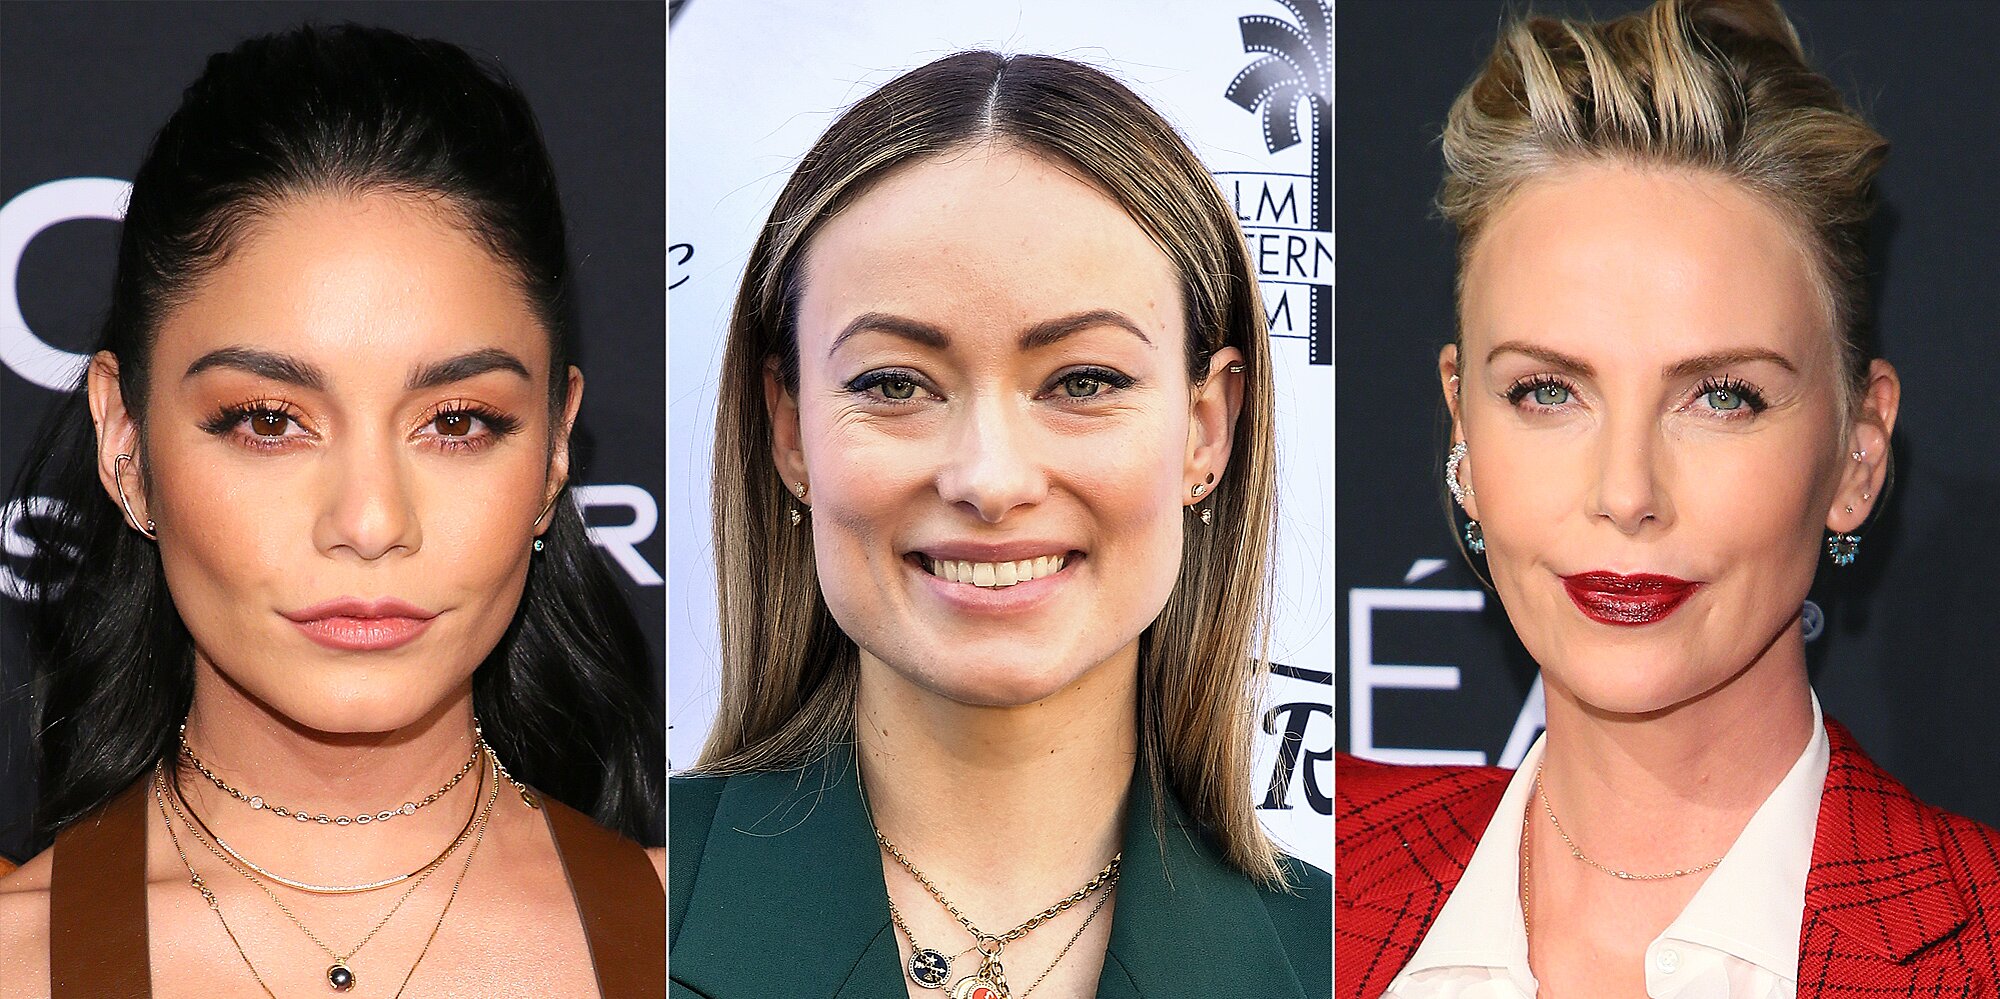 Stylish stars like Vanessa Hudgens and Charlize Theron love the cool coin necklace look, as does Olivia Wilde, who scored hers at Foundrae.